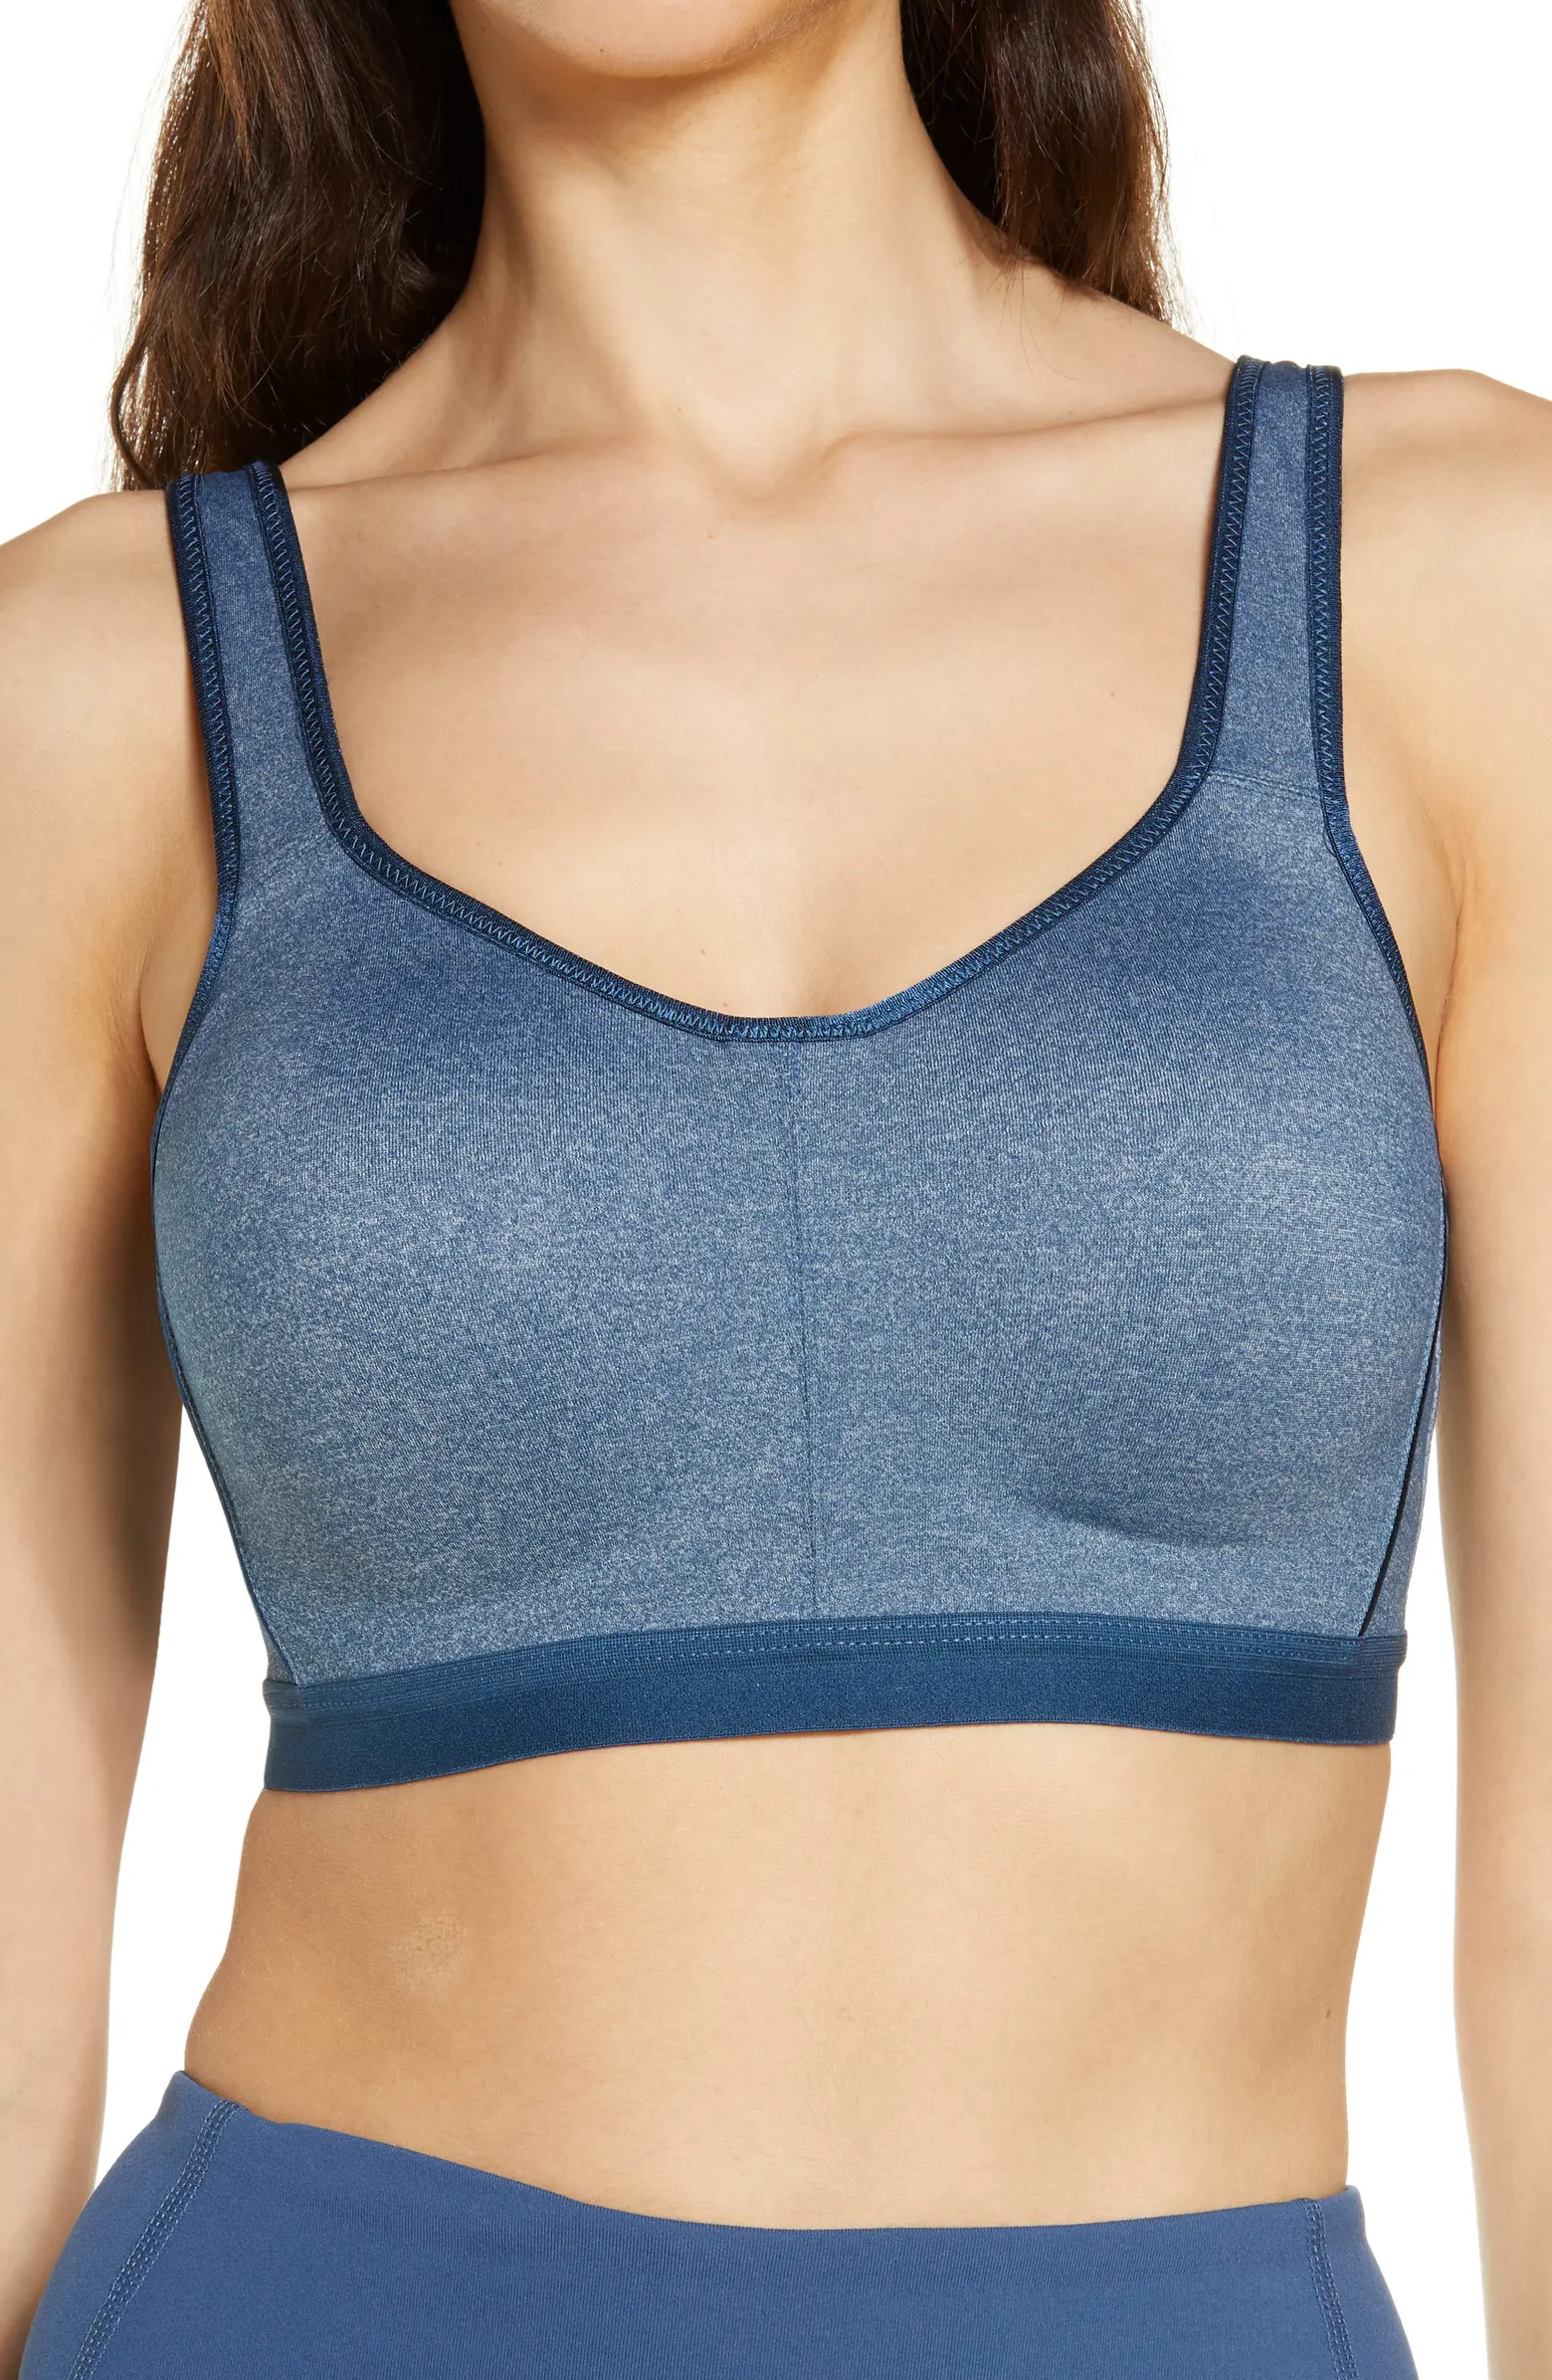 22x (!!!) the safe limit of BPA was just found in sports bras and